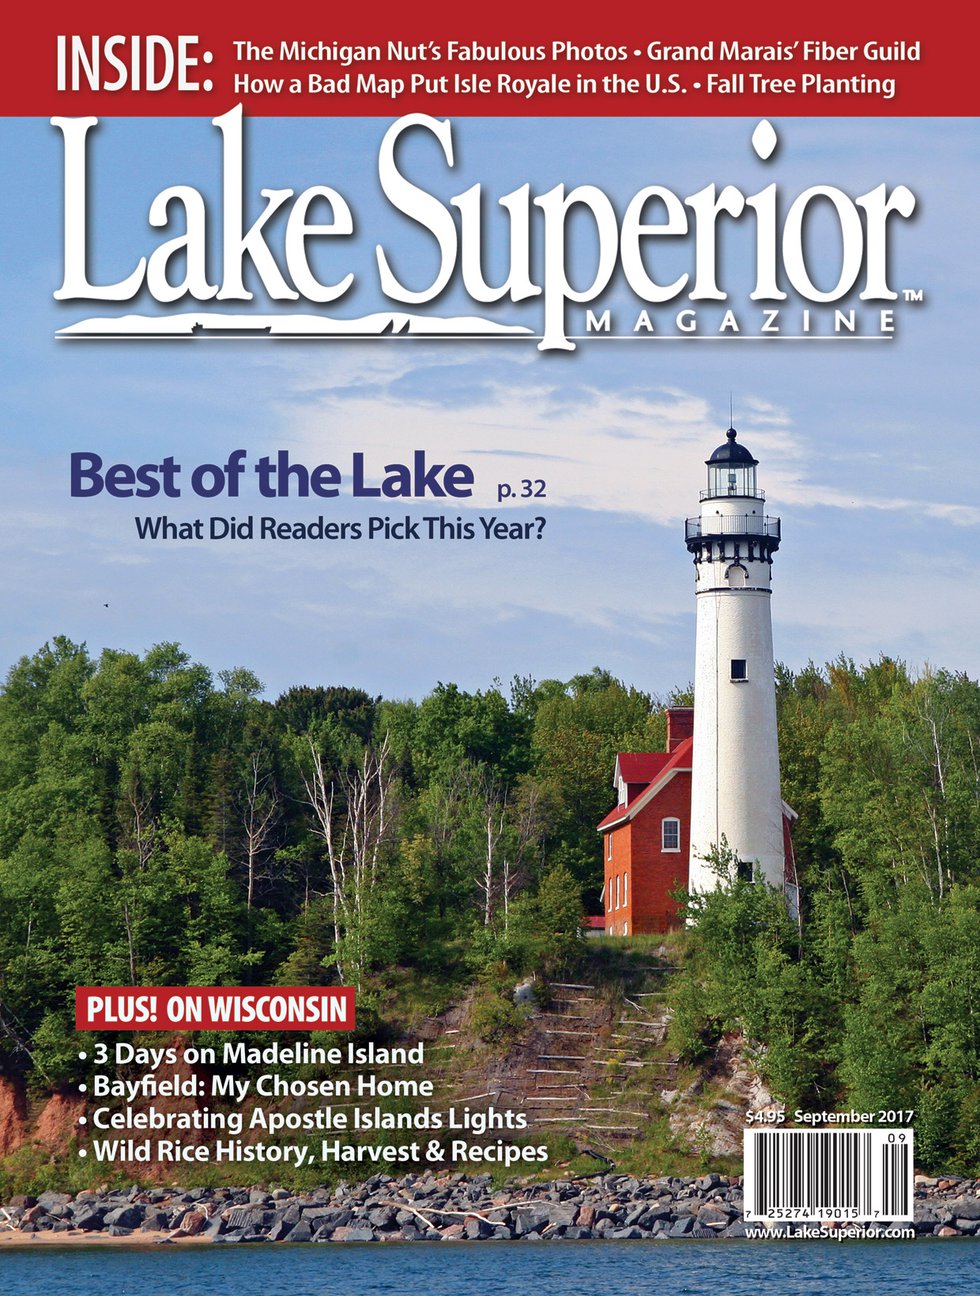 On the cover: The Wisconsin lighthouse on Outer Island is one of those with rare guided cruise visits possible only during the Apostle Islands Lighthouse Celebration. Photo by Mark Weller.